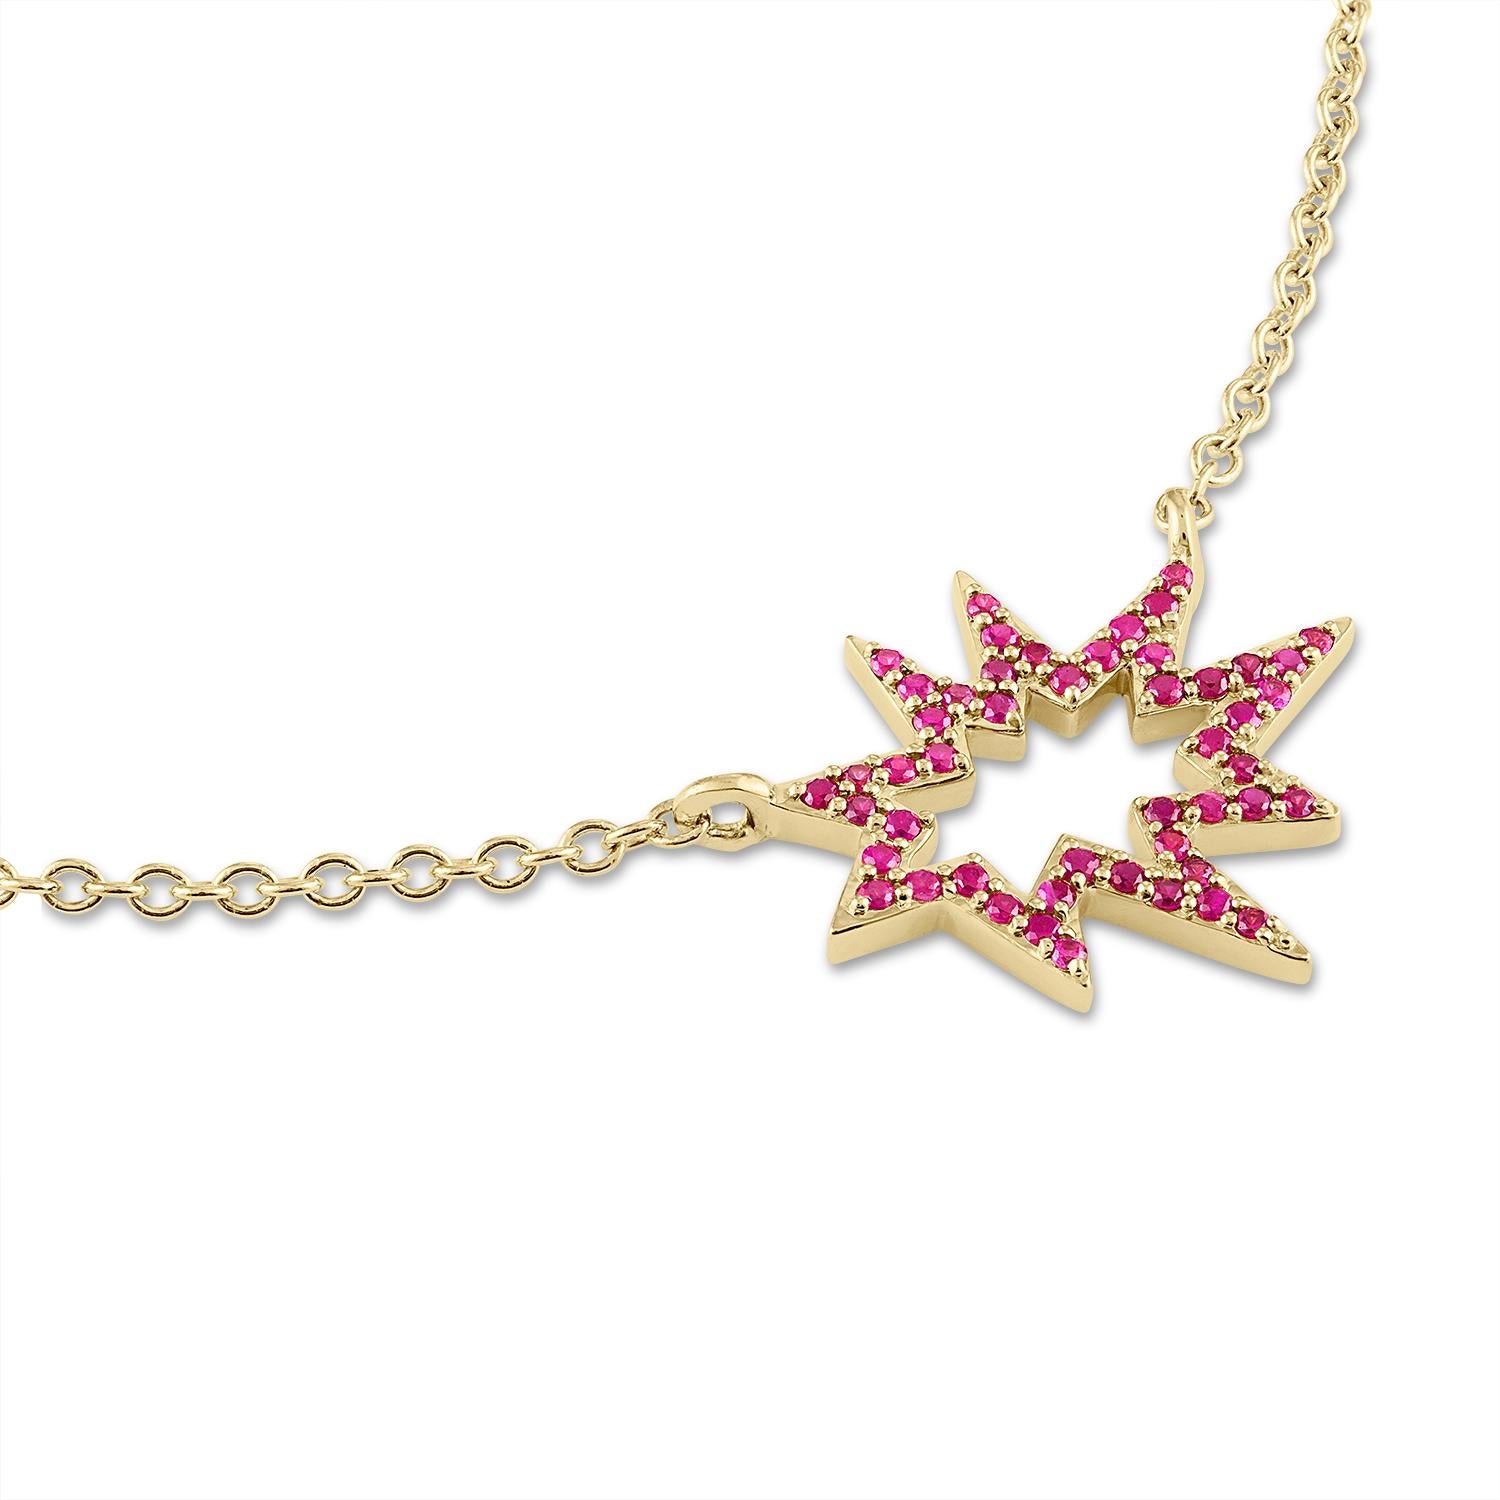 Sunny and bright! Our iconic matte gold Stellina necklace is fresher than ever in its Stellina Nova incarnation. This version features gorgeous pavé rubies for some elegant razzle dazzle. Hanging on a delicate gold chain, this piece is made to